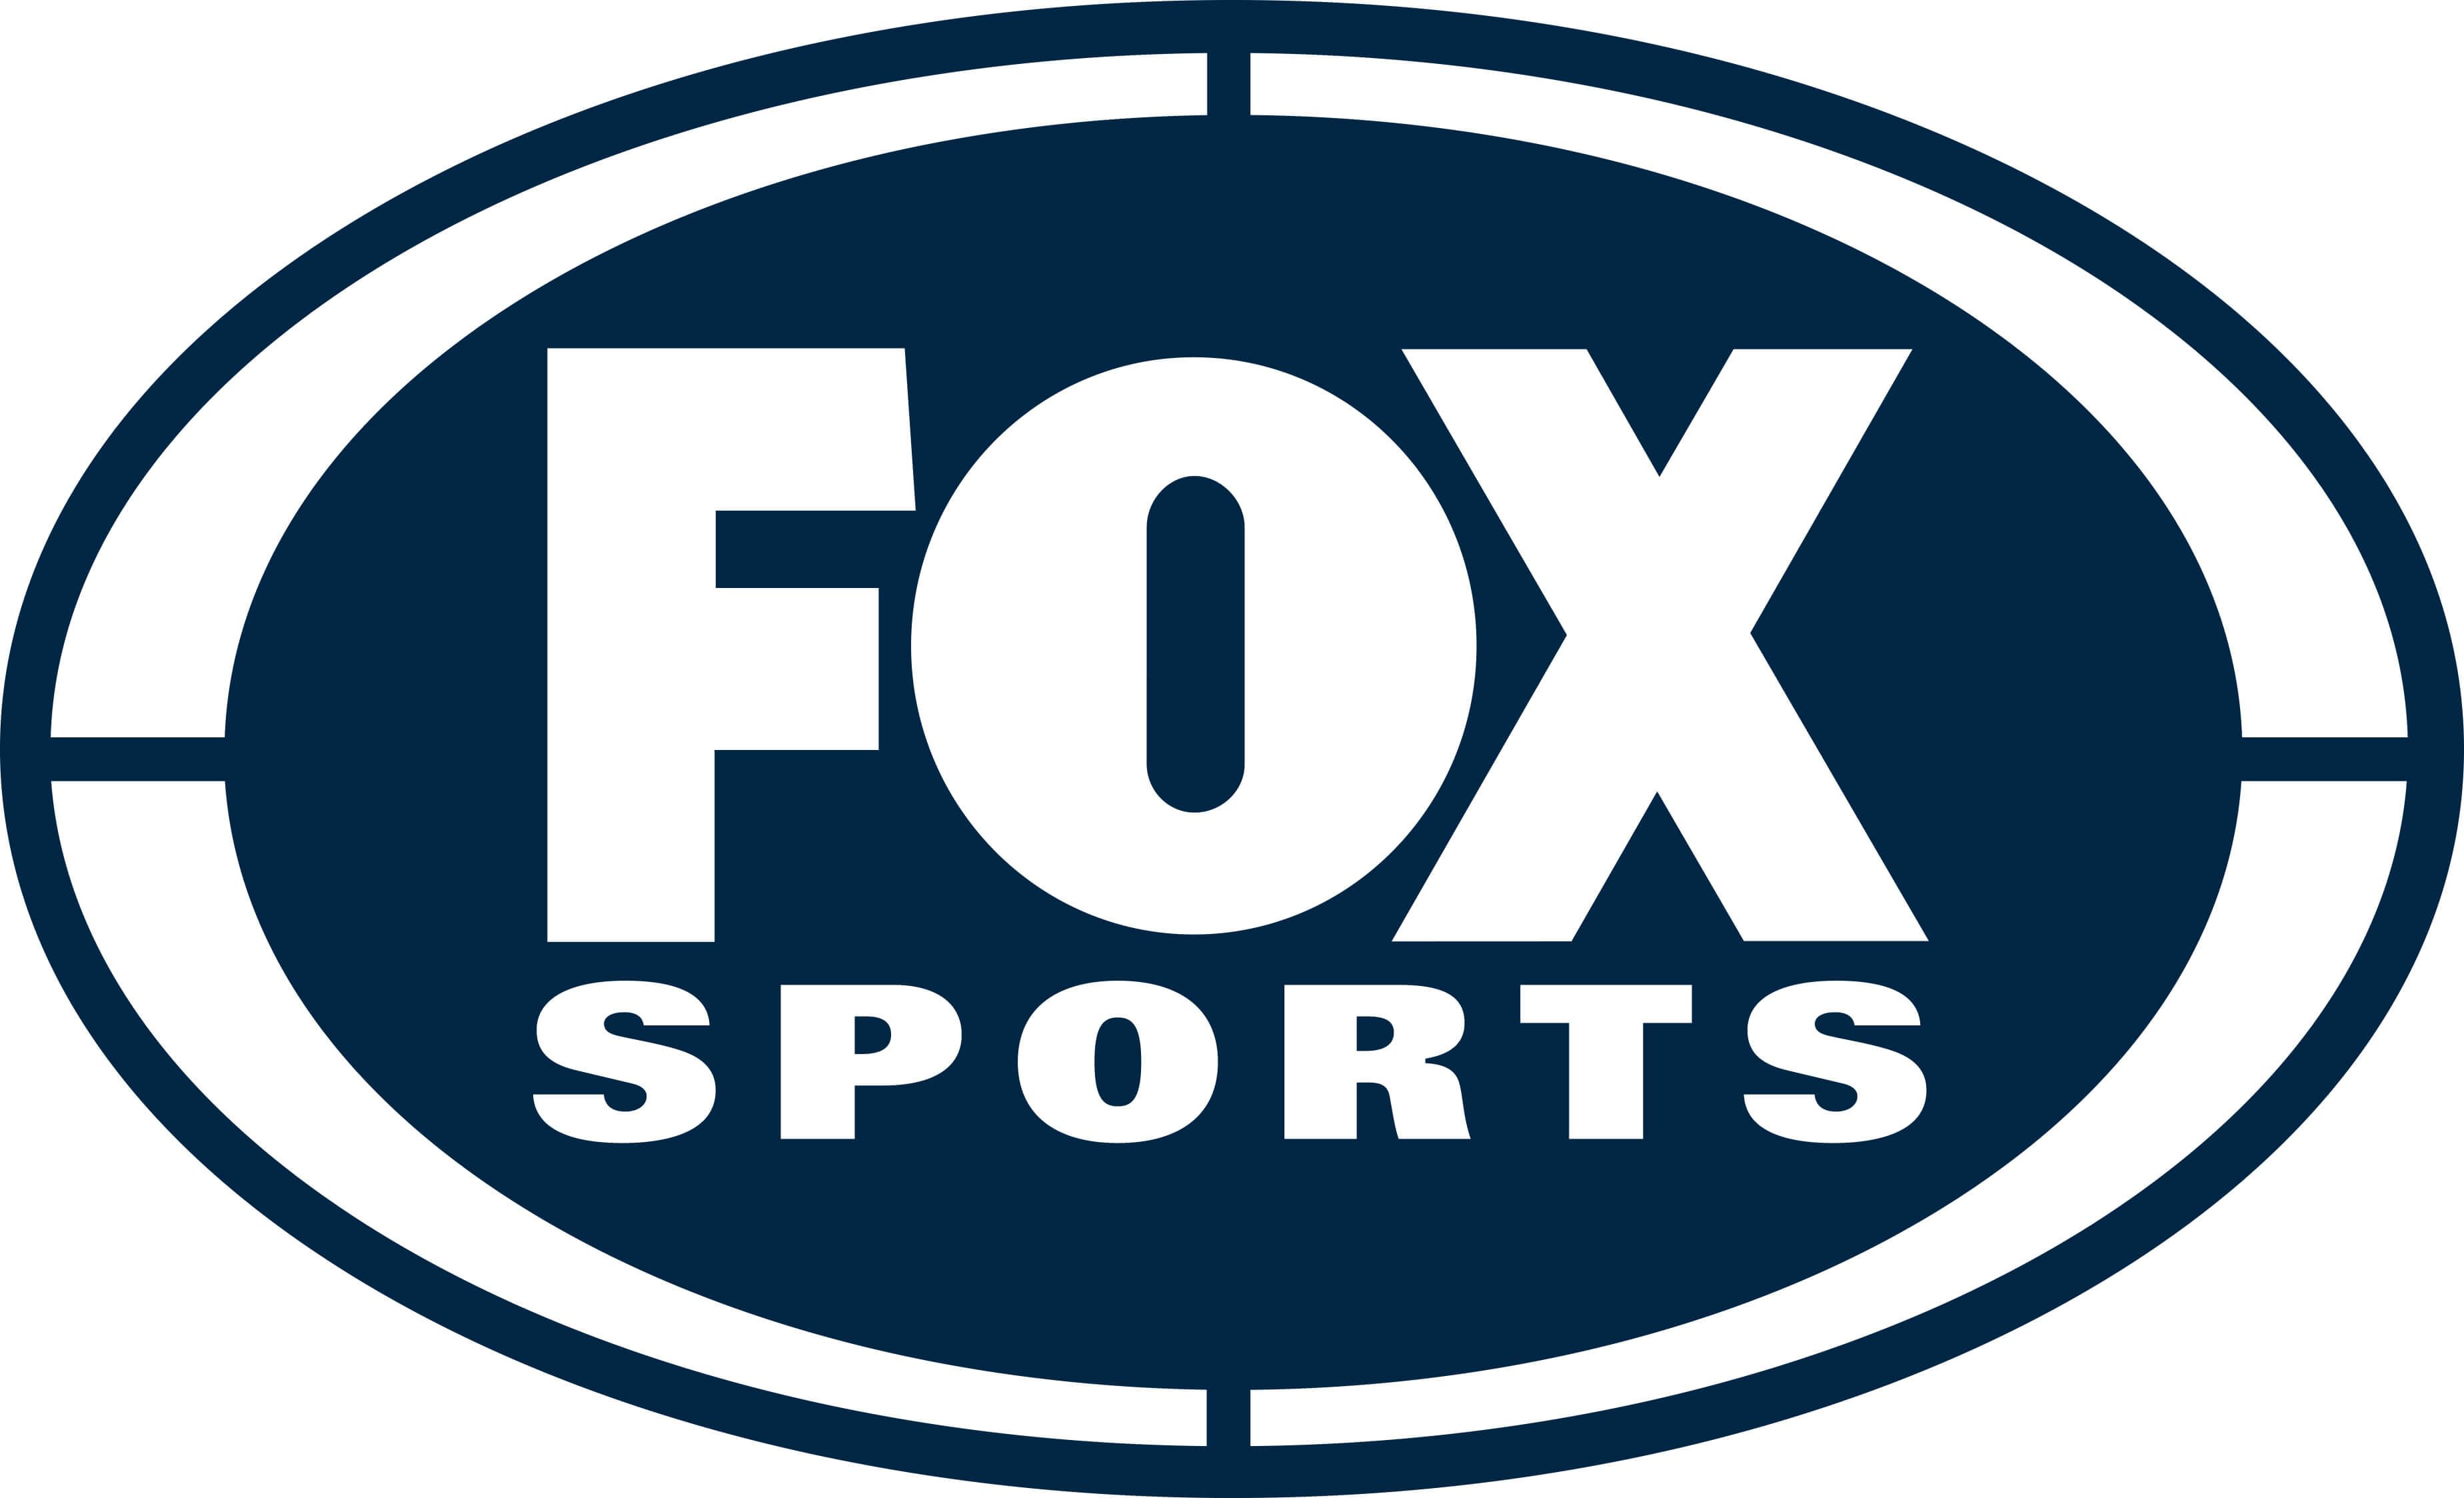 Fox Sports Logo - Image result for fox sports logo | branding - collecting marks ...